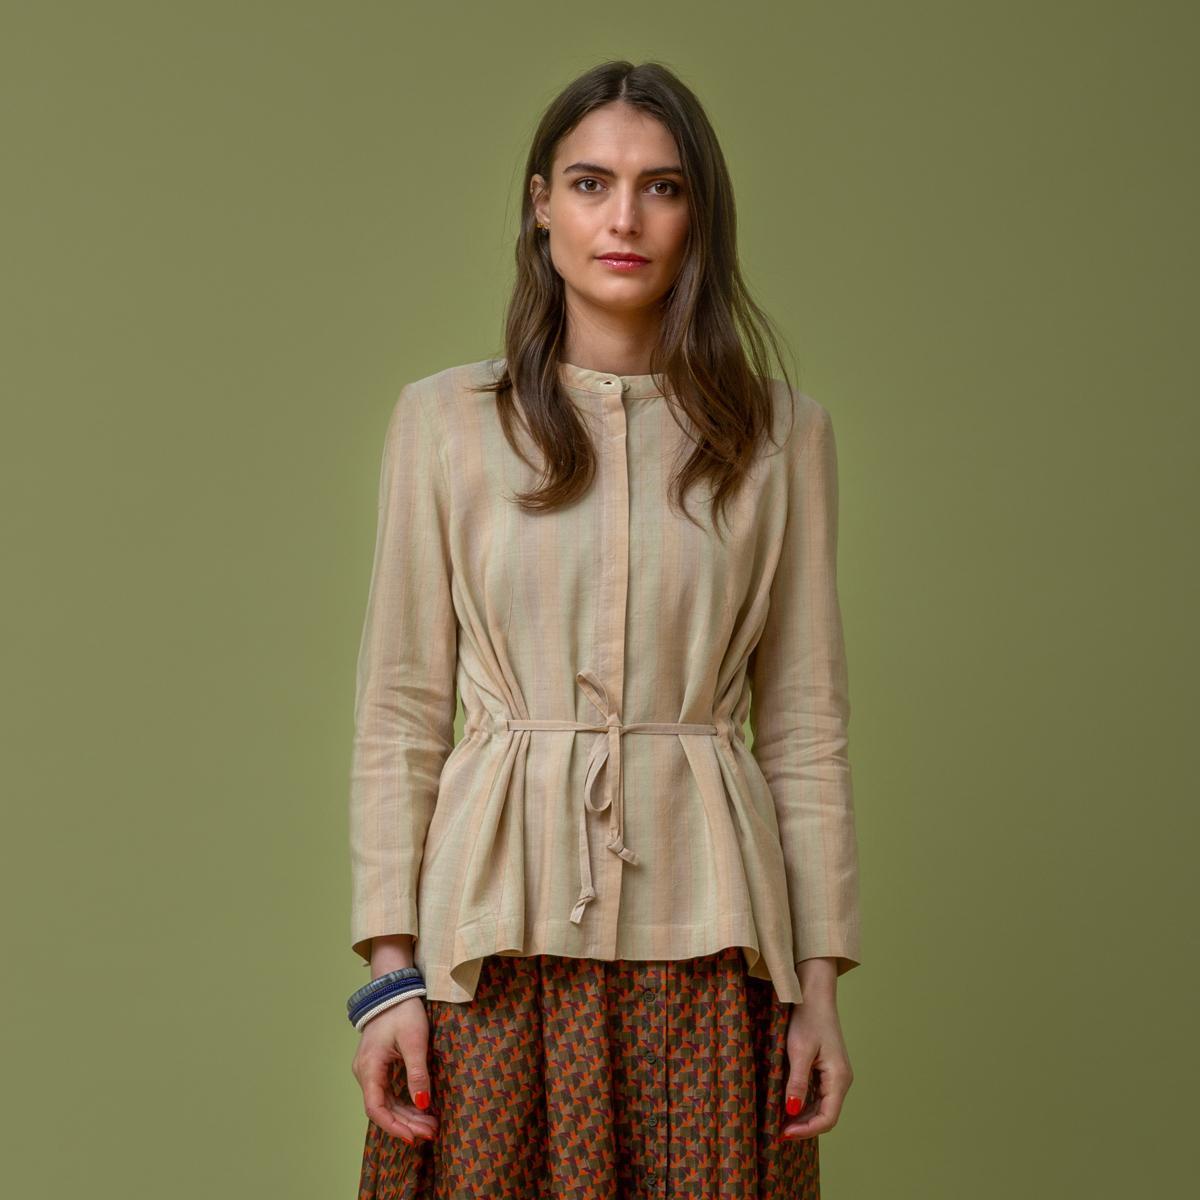 Urban - Lilith Paris is a French brand that has been creating eco-friendly  fashion for women for over 30 years.